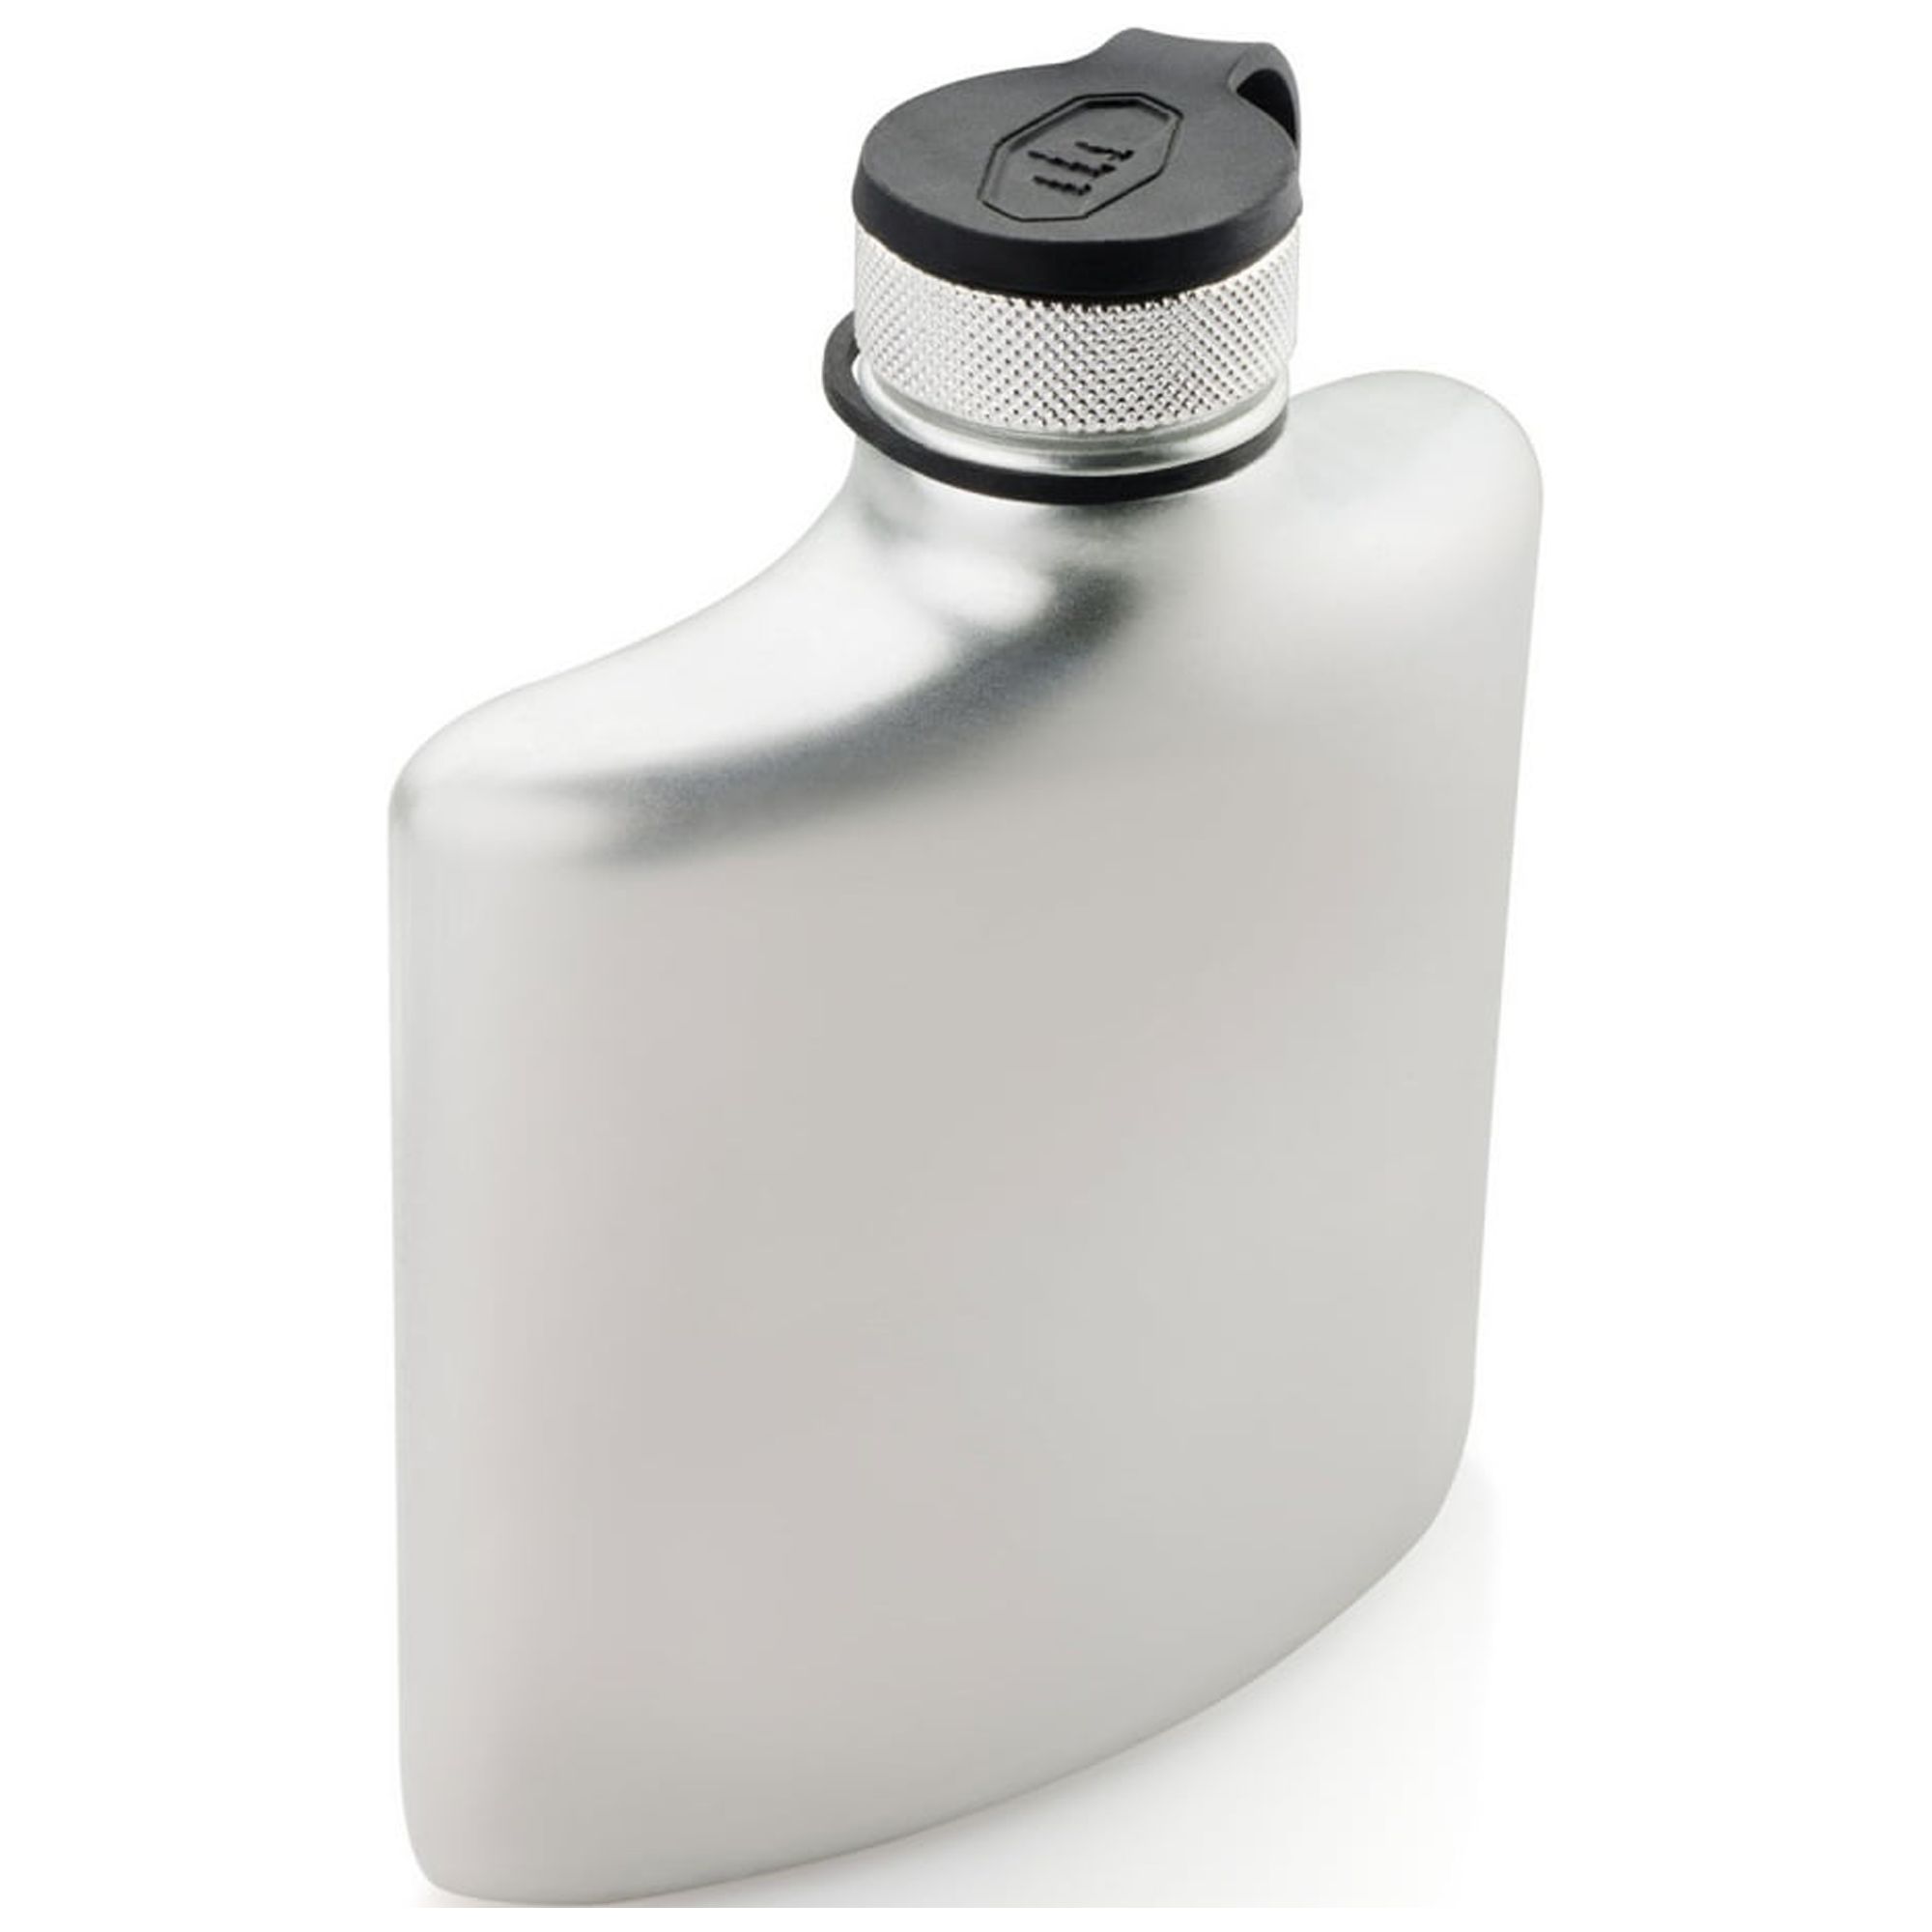 GSI Outdoors Glacier Stainless Hip Flask - image 1 of 2